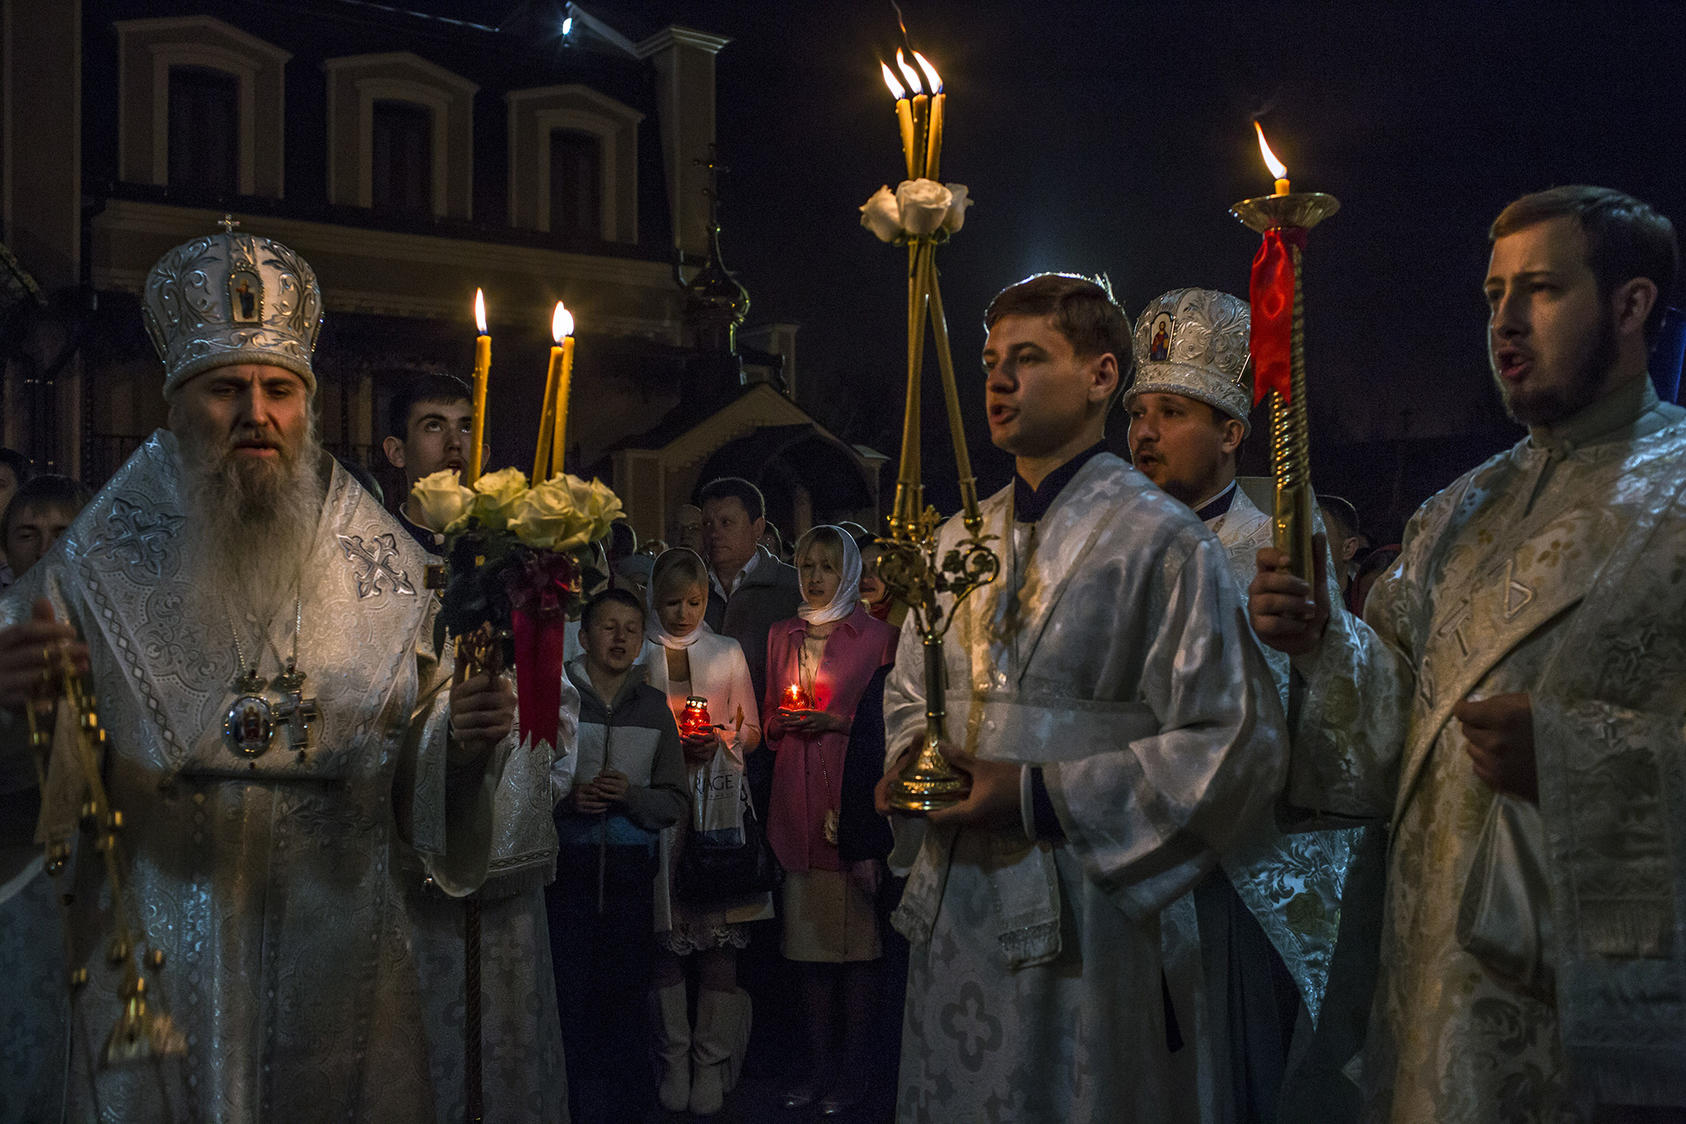 Orthodox worshippers during a midnight Easter ceremony outside the St. Nicholas Cathedral in Donetsk, Ukraine, April 20, 2014. (Mauricio Lima/The New York Times)